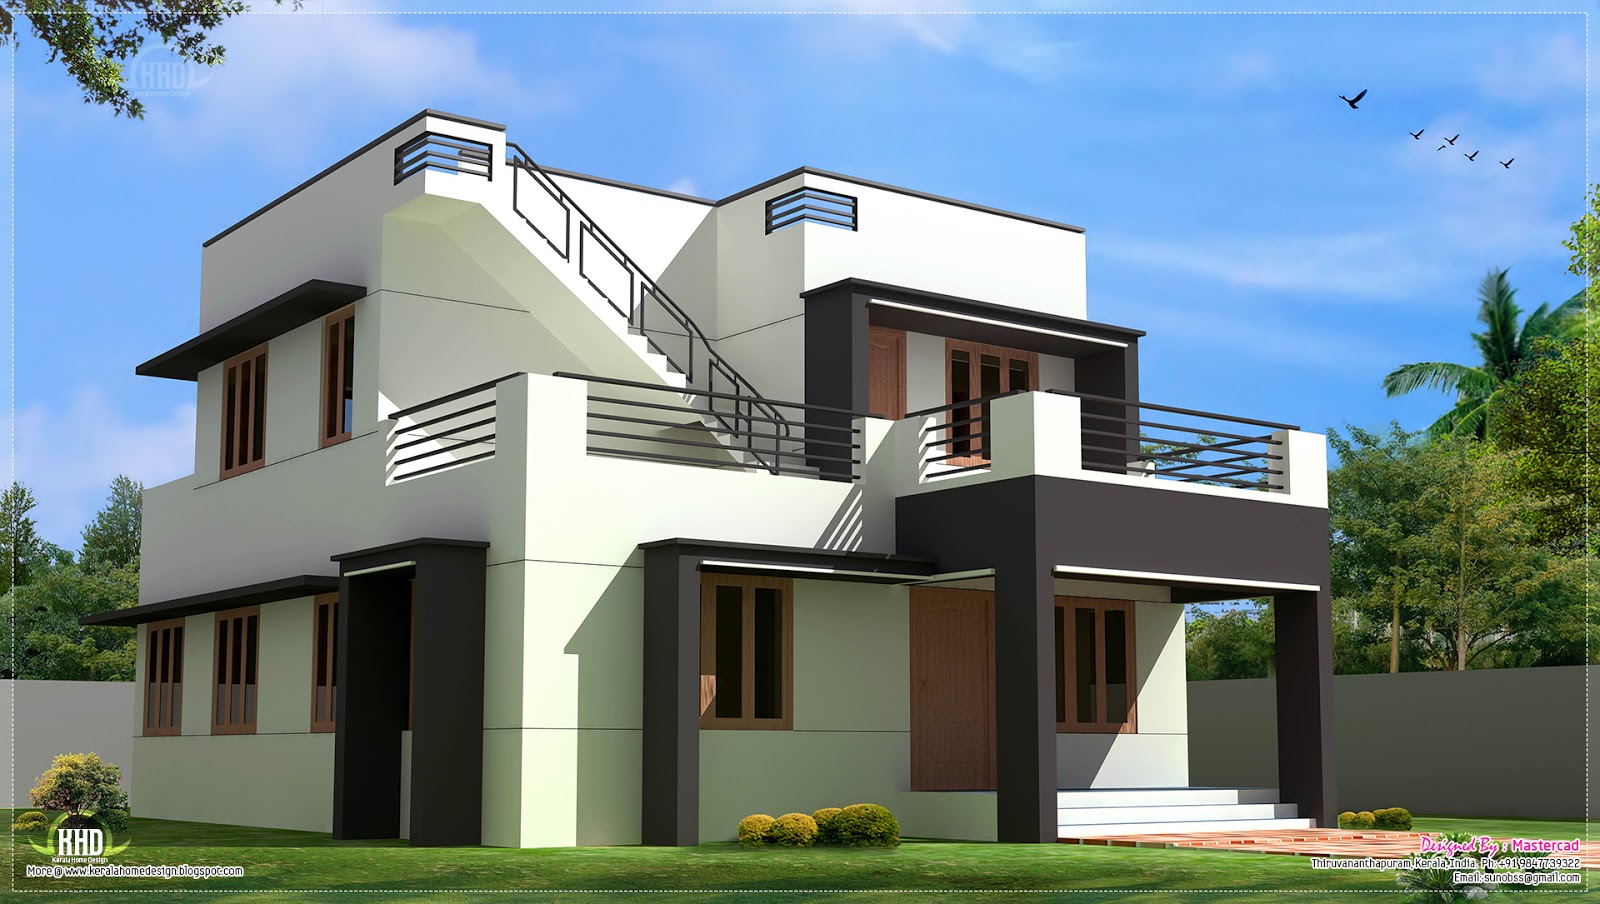 The Design of Modern House Plans